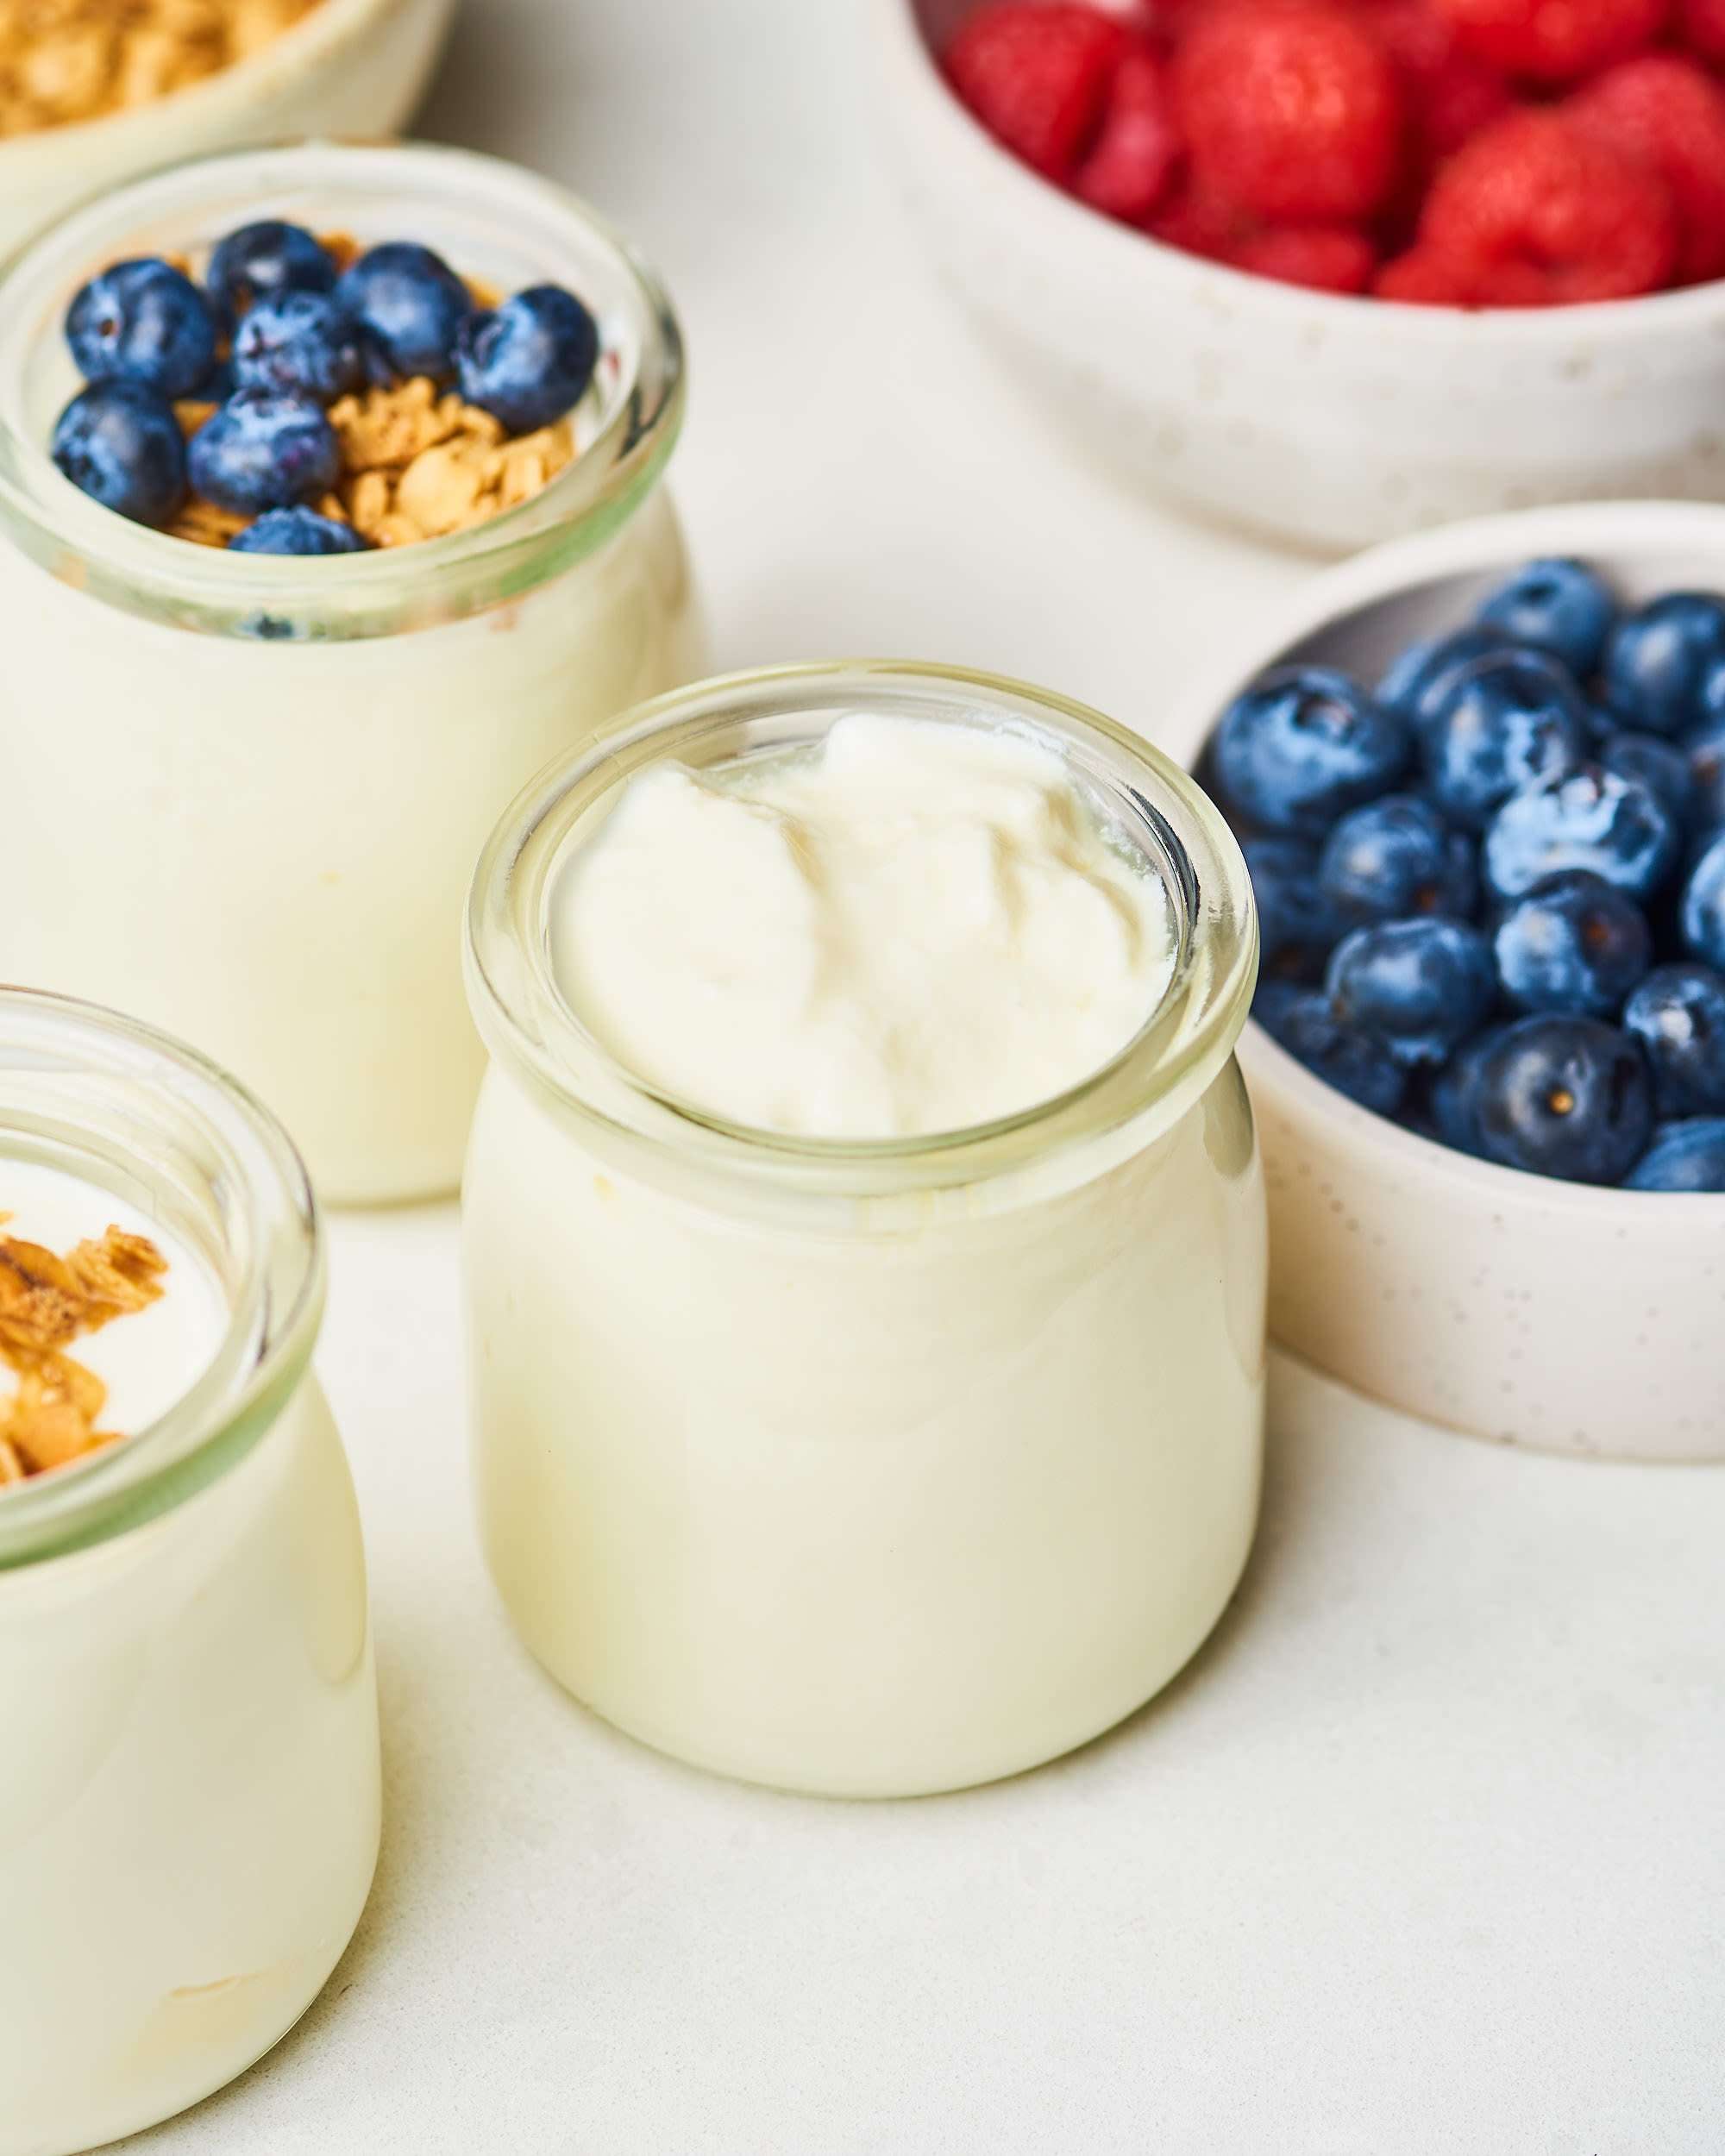 How To Make Yogurt in an Instant Pot